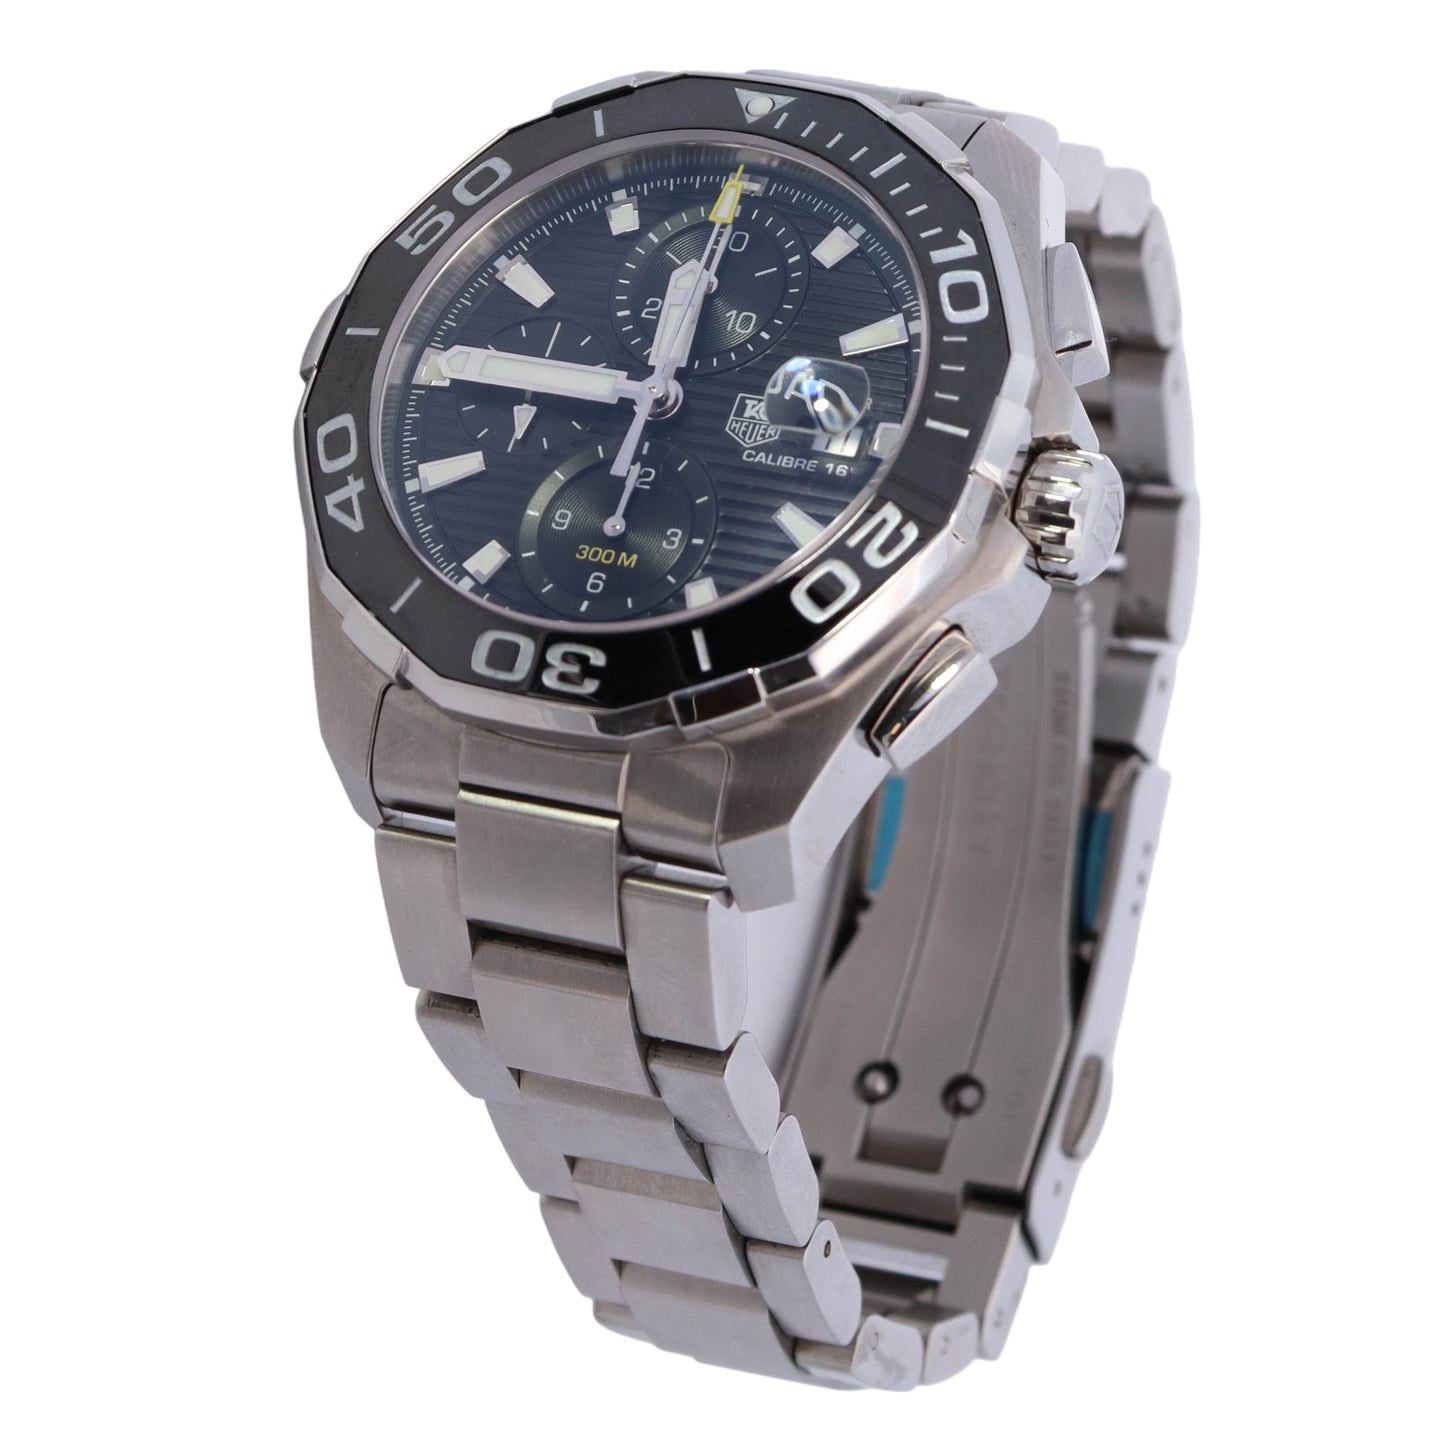 Tag Heuer Aquaracer Chronograph Stainless Steel 43mm Black Chromograph Stick Dial Watch Reference #: CAY211A